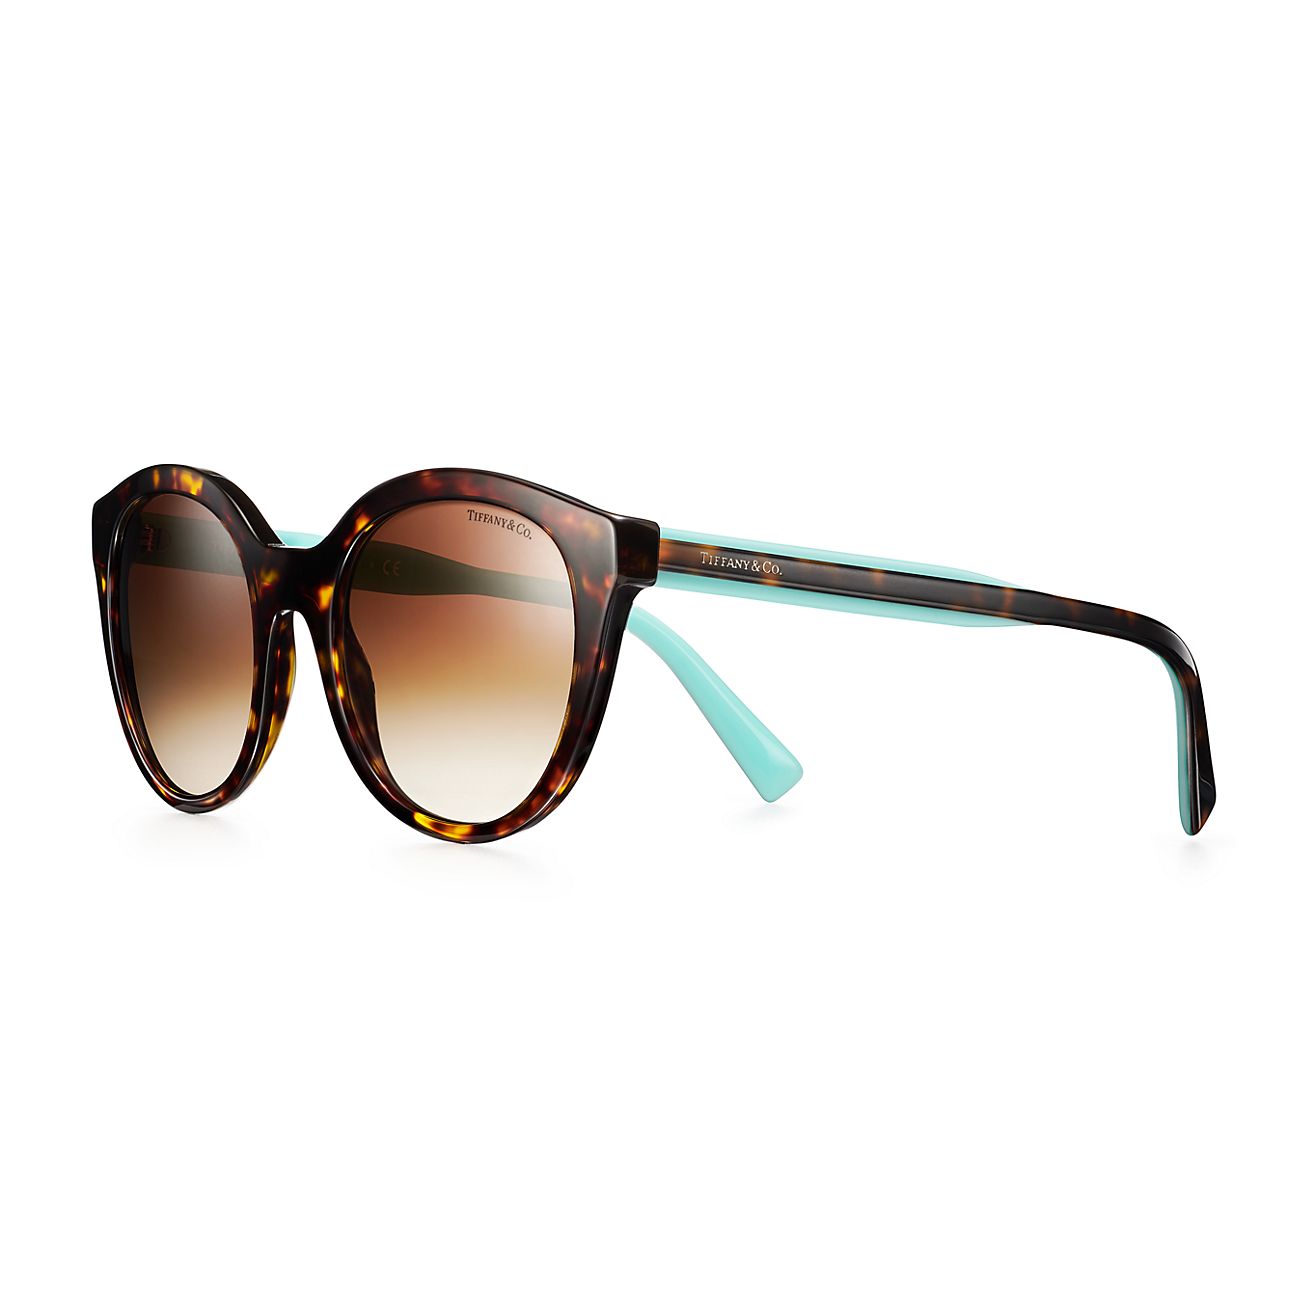 Tiffany Blue® panthos sunglasses in 